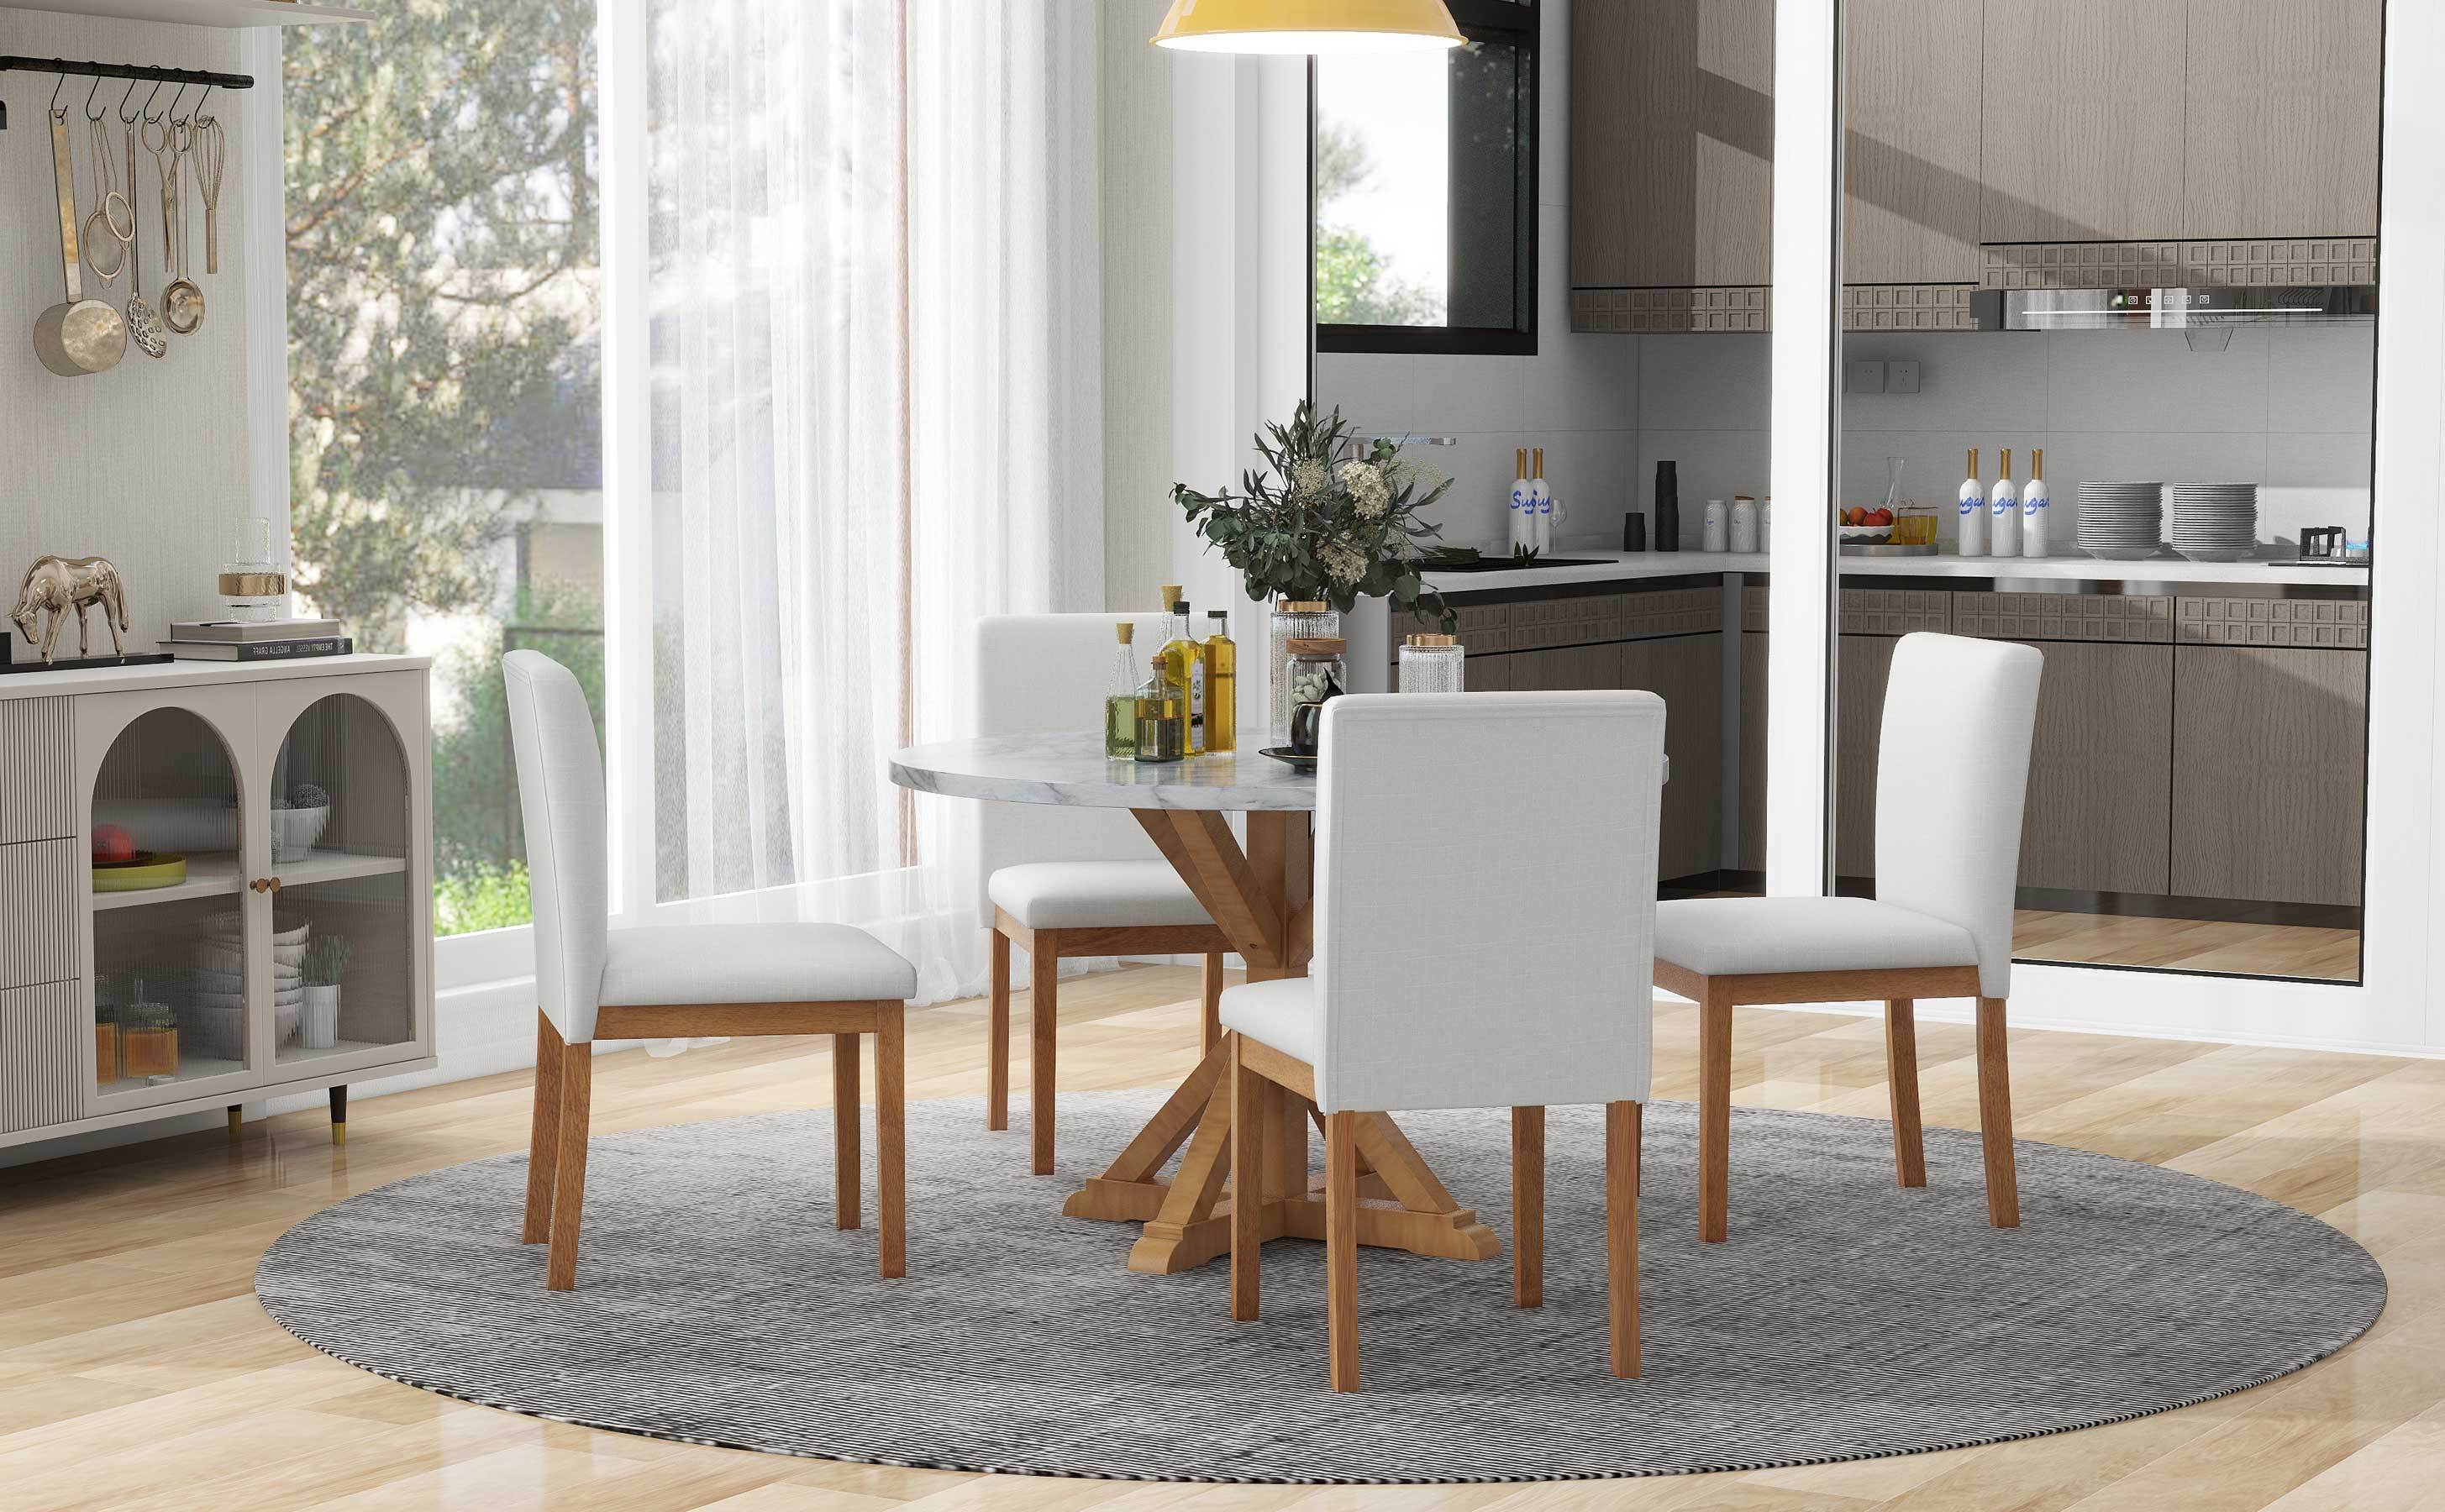 TREXM 5-Piece Farmhouse Style Dining Table Set, Marble Sticker and Cross Bracket Pedestal Dining Table, and 4 Upholstered Chairs (White+Walnut)